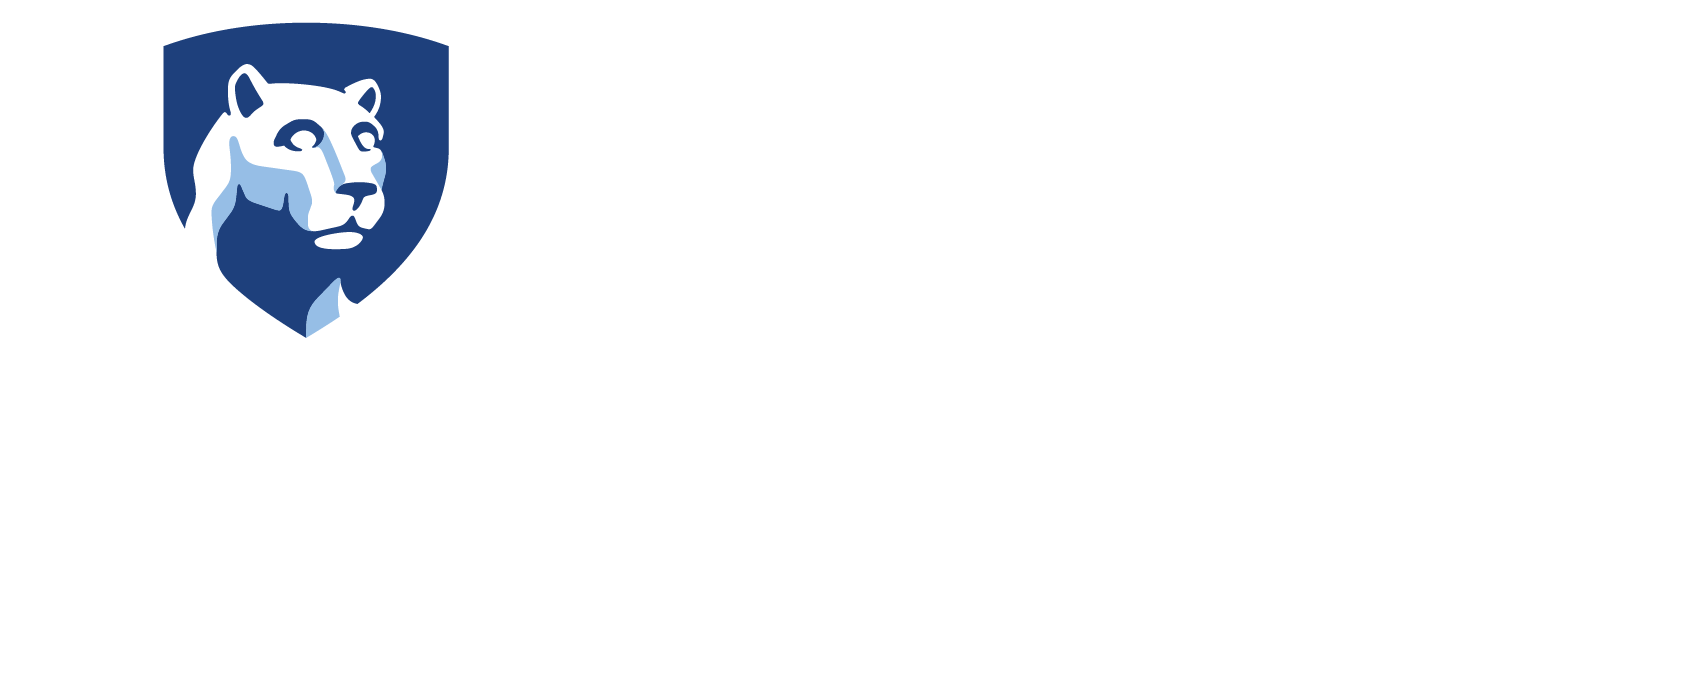 Penn State Lion Shield and Office of the Vice President for Research wordmark